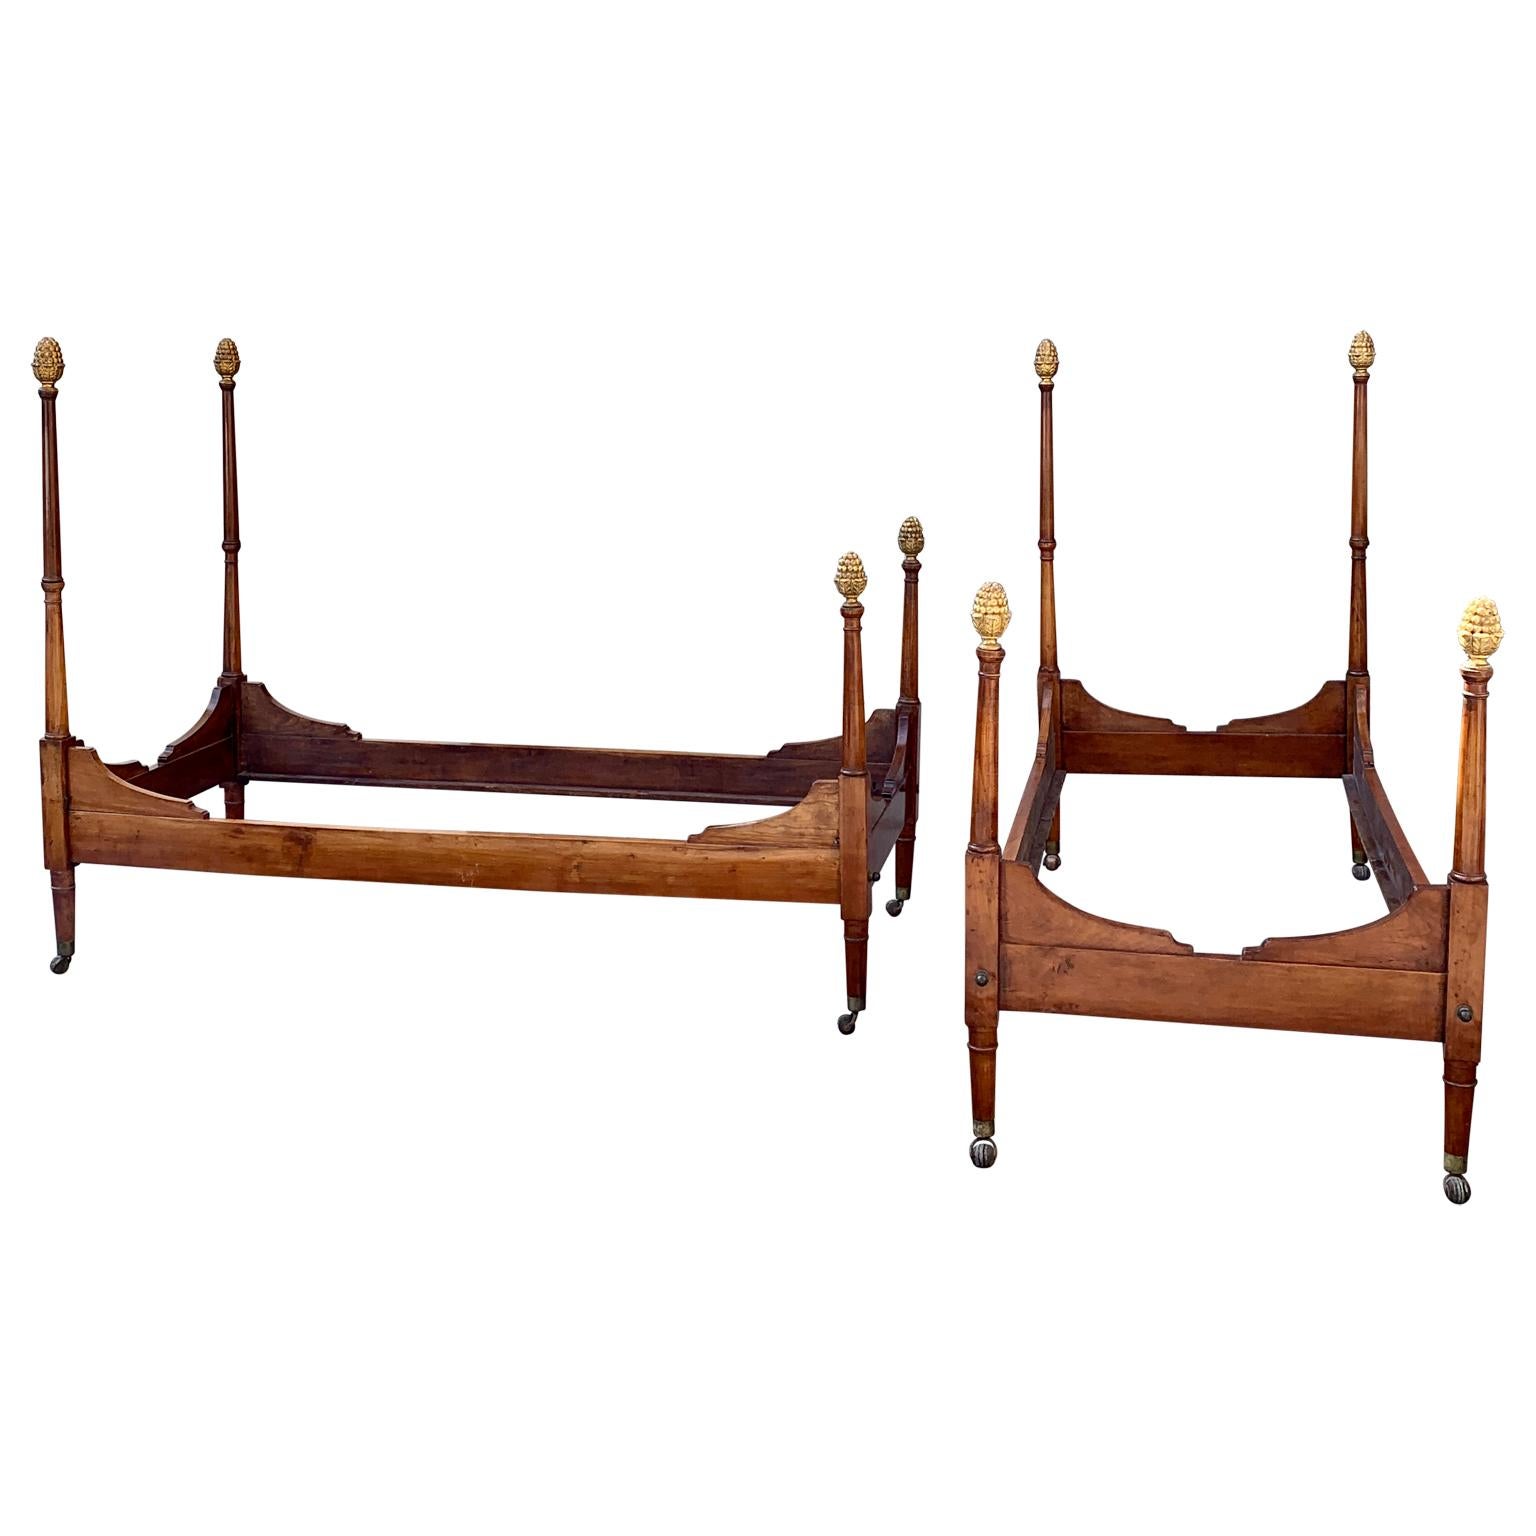 Early 19th Century Pair of Period Empire Beds from Tuscany Italy, circa 1810